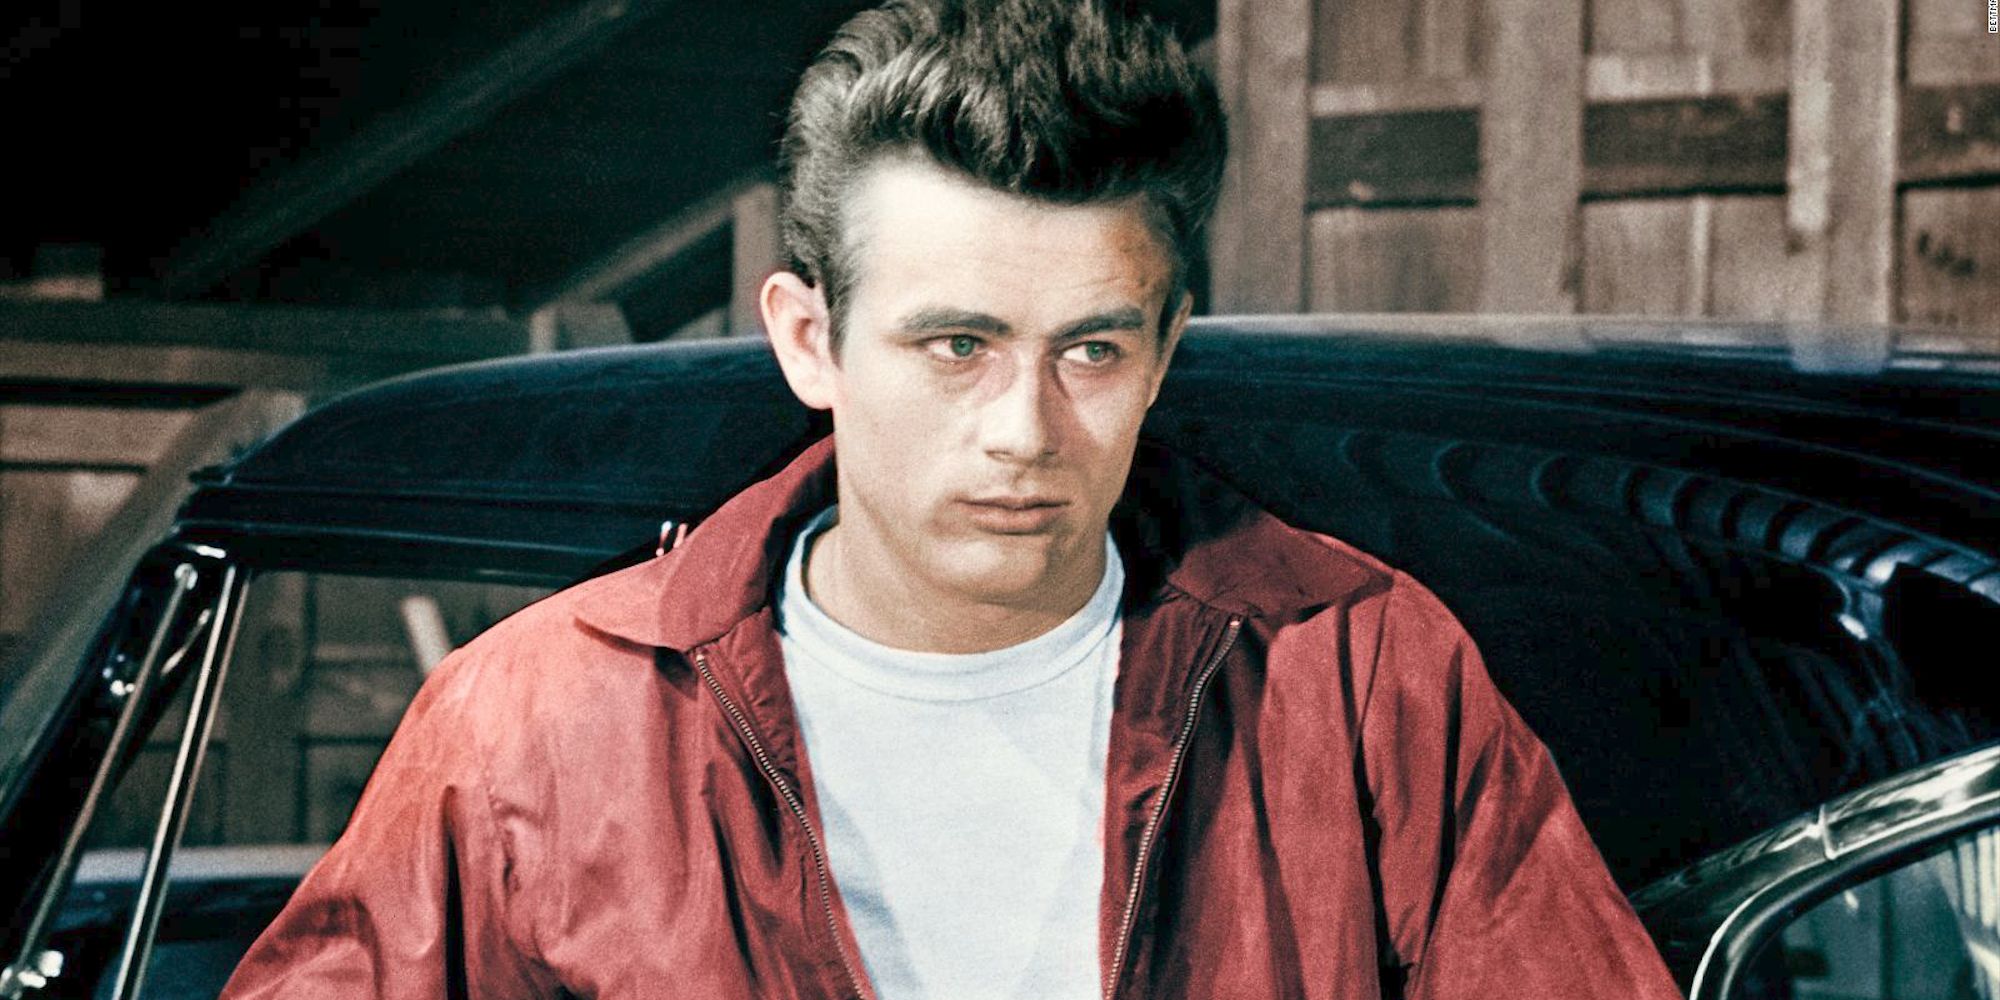 Jim Stark looking intently to a point off-camera in Rebel Without a Cause